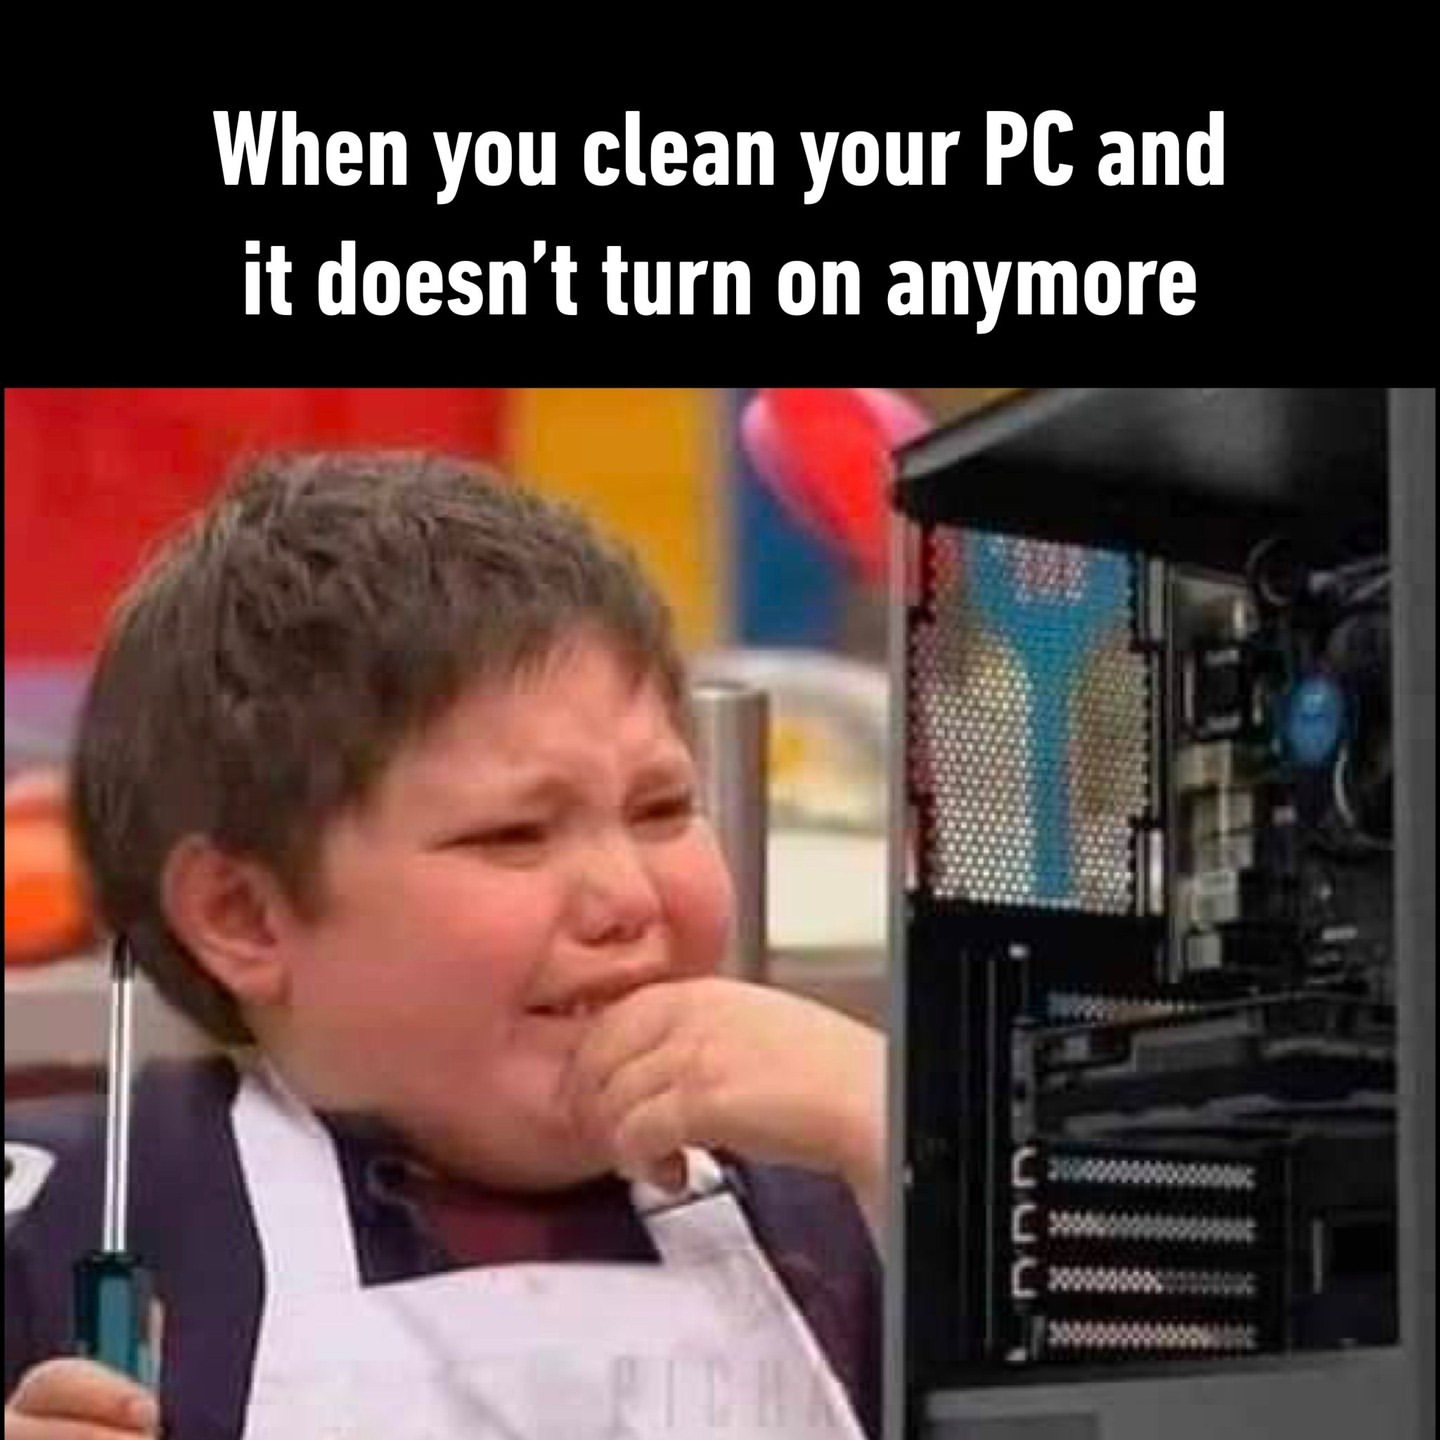 When you clean your PC and it doesn't turn on anymore.